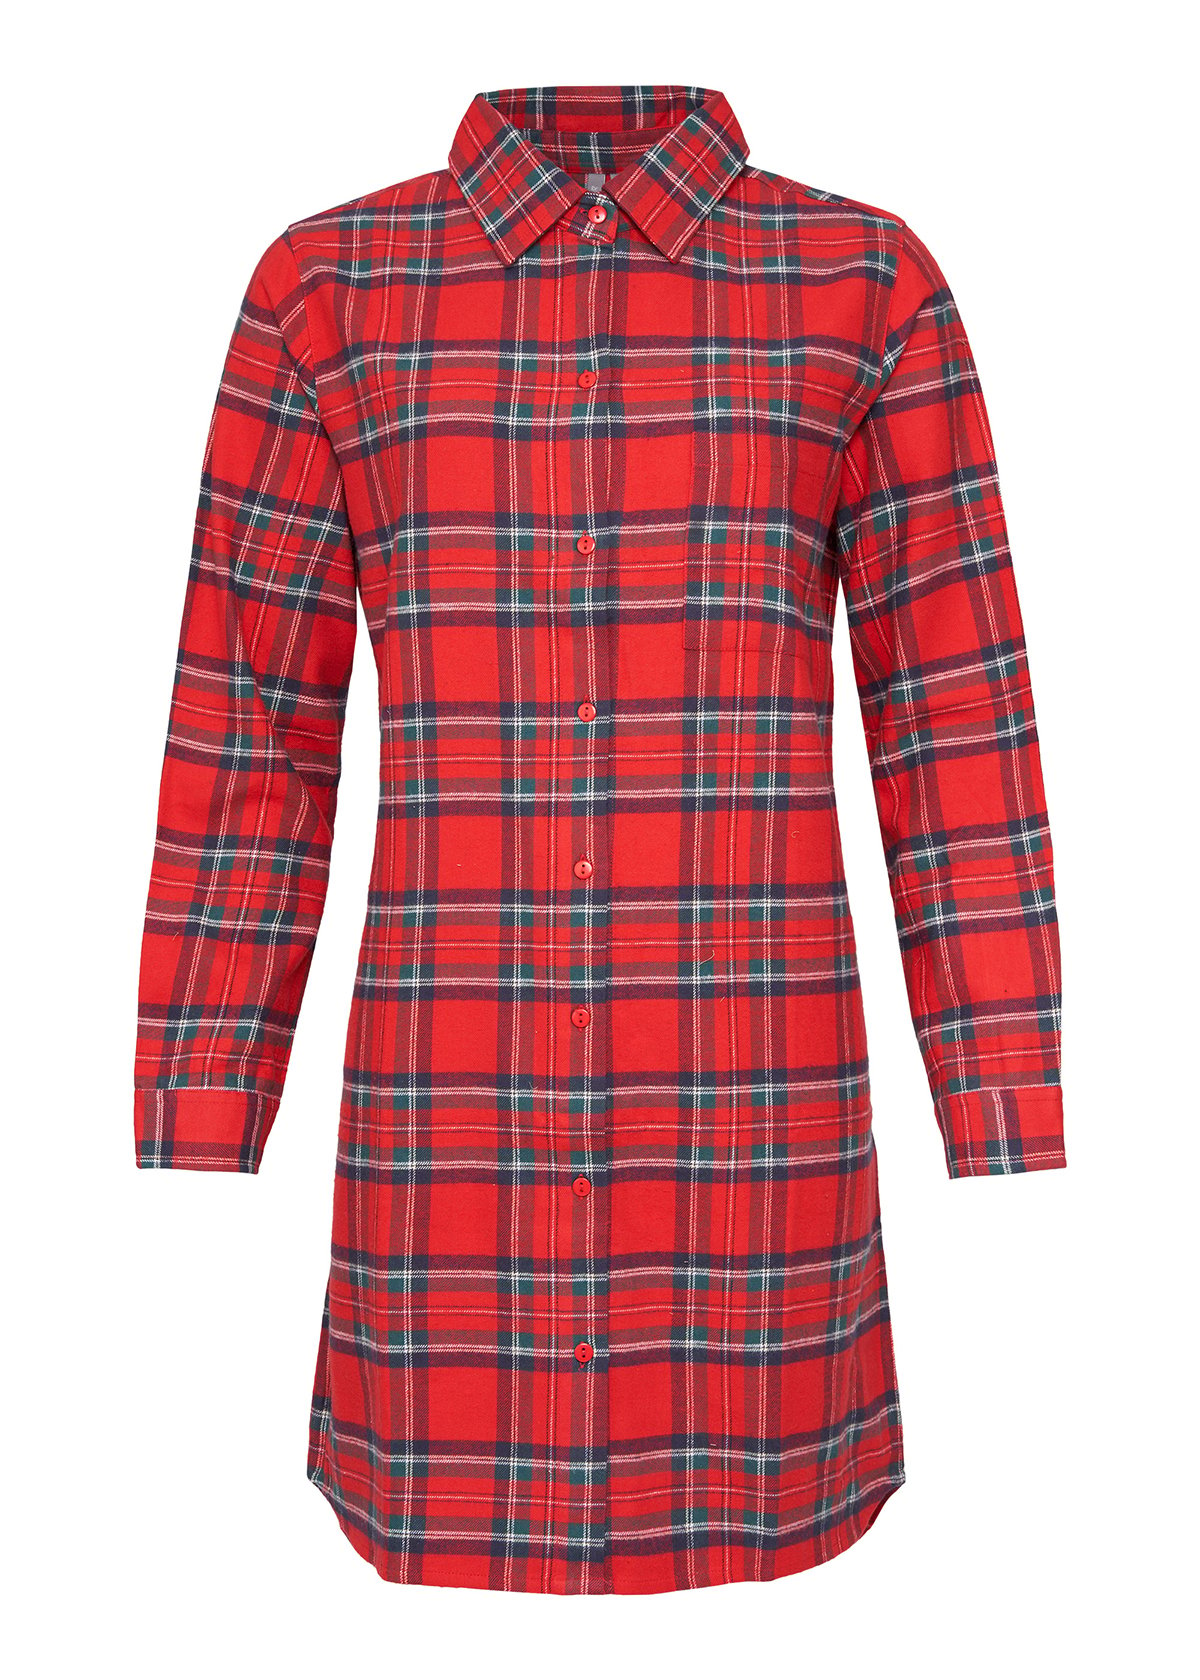 By Louise By Louise Dames Pyjama Nachthemd Flanel Geruit Rood